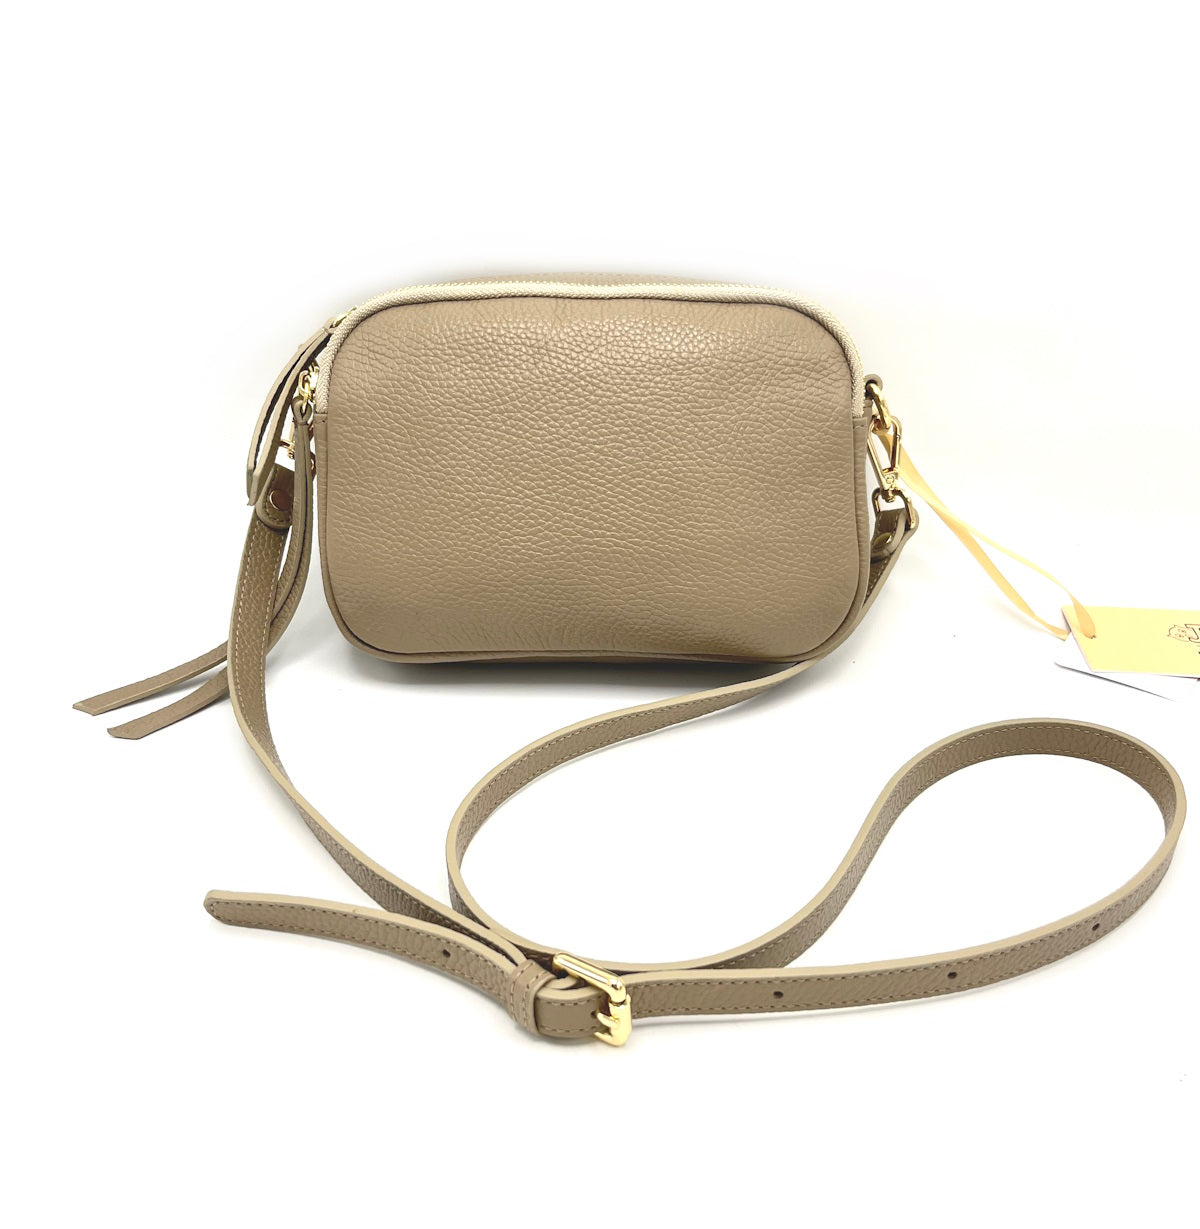 Genuine leather shoulder bag, for women, made in Italy, art. 112411